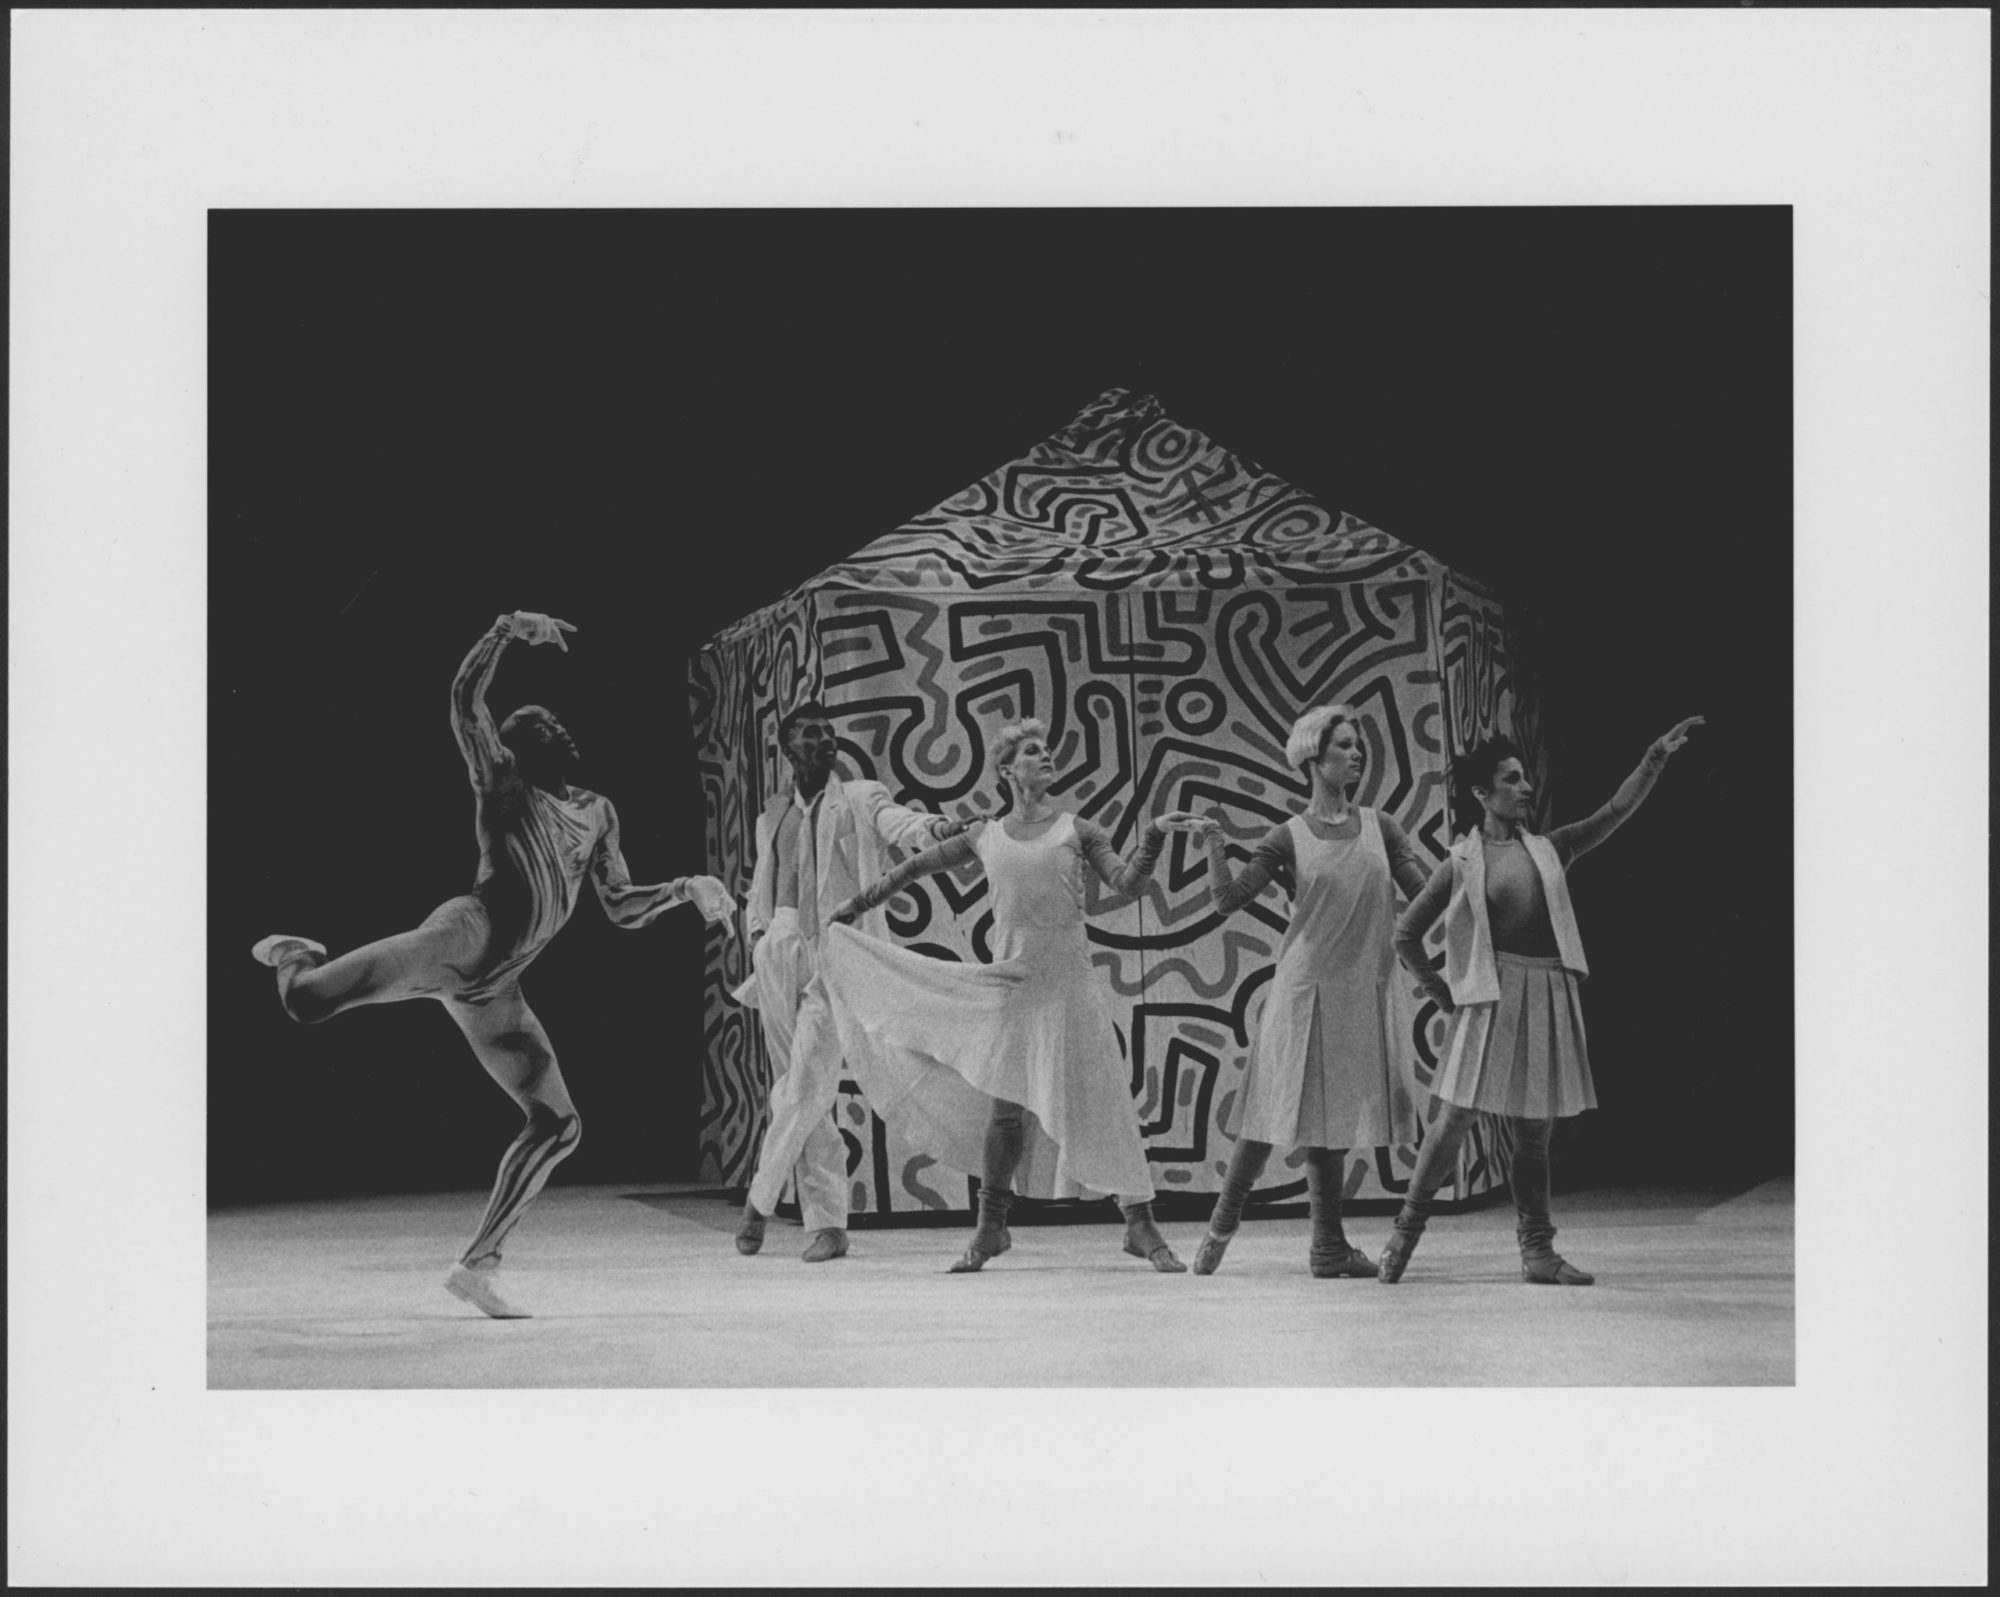 Grayscale photograph of five dancers on stage posing in dramatic manner with patterned tent in the background